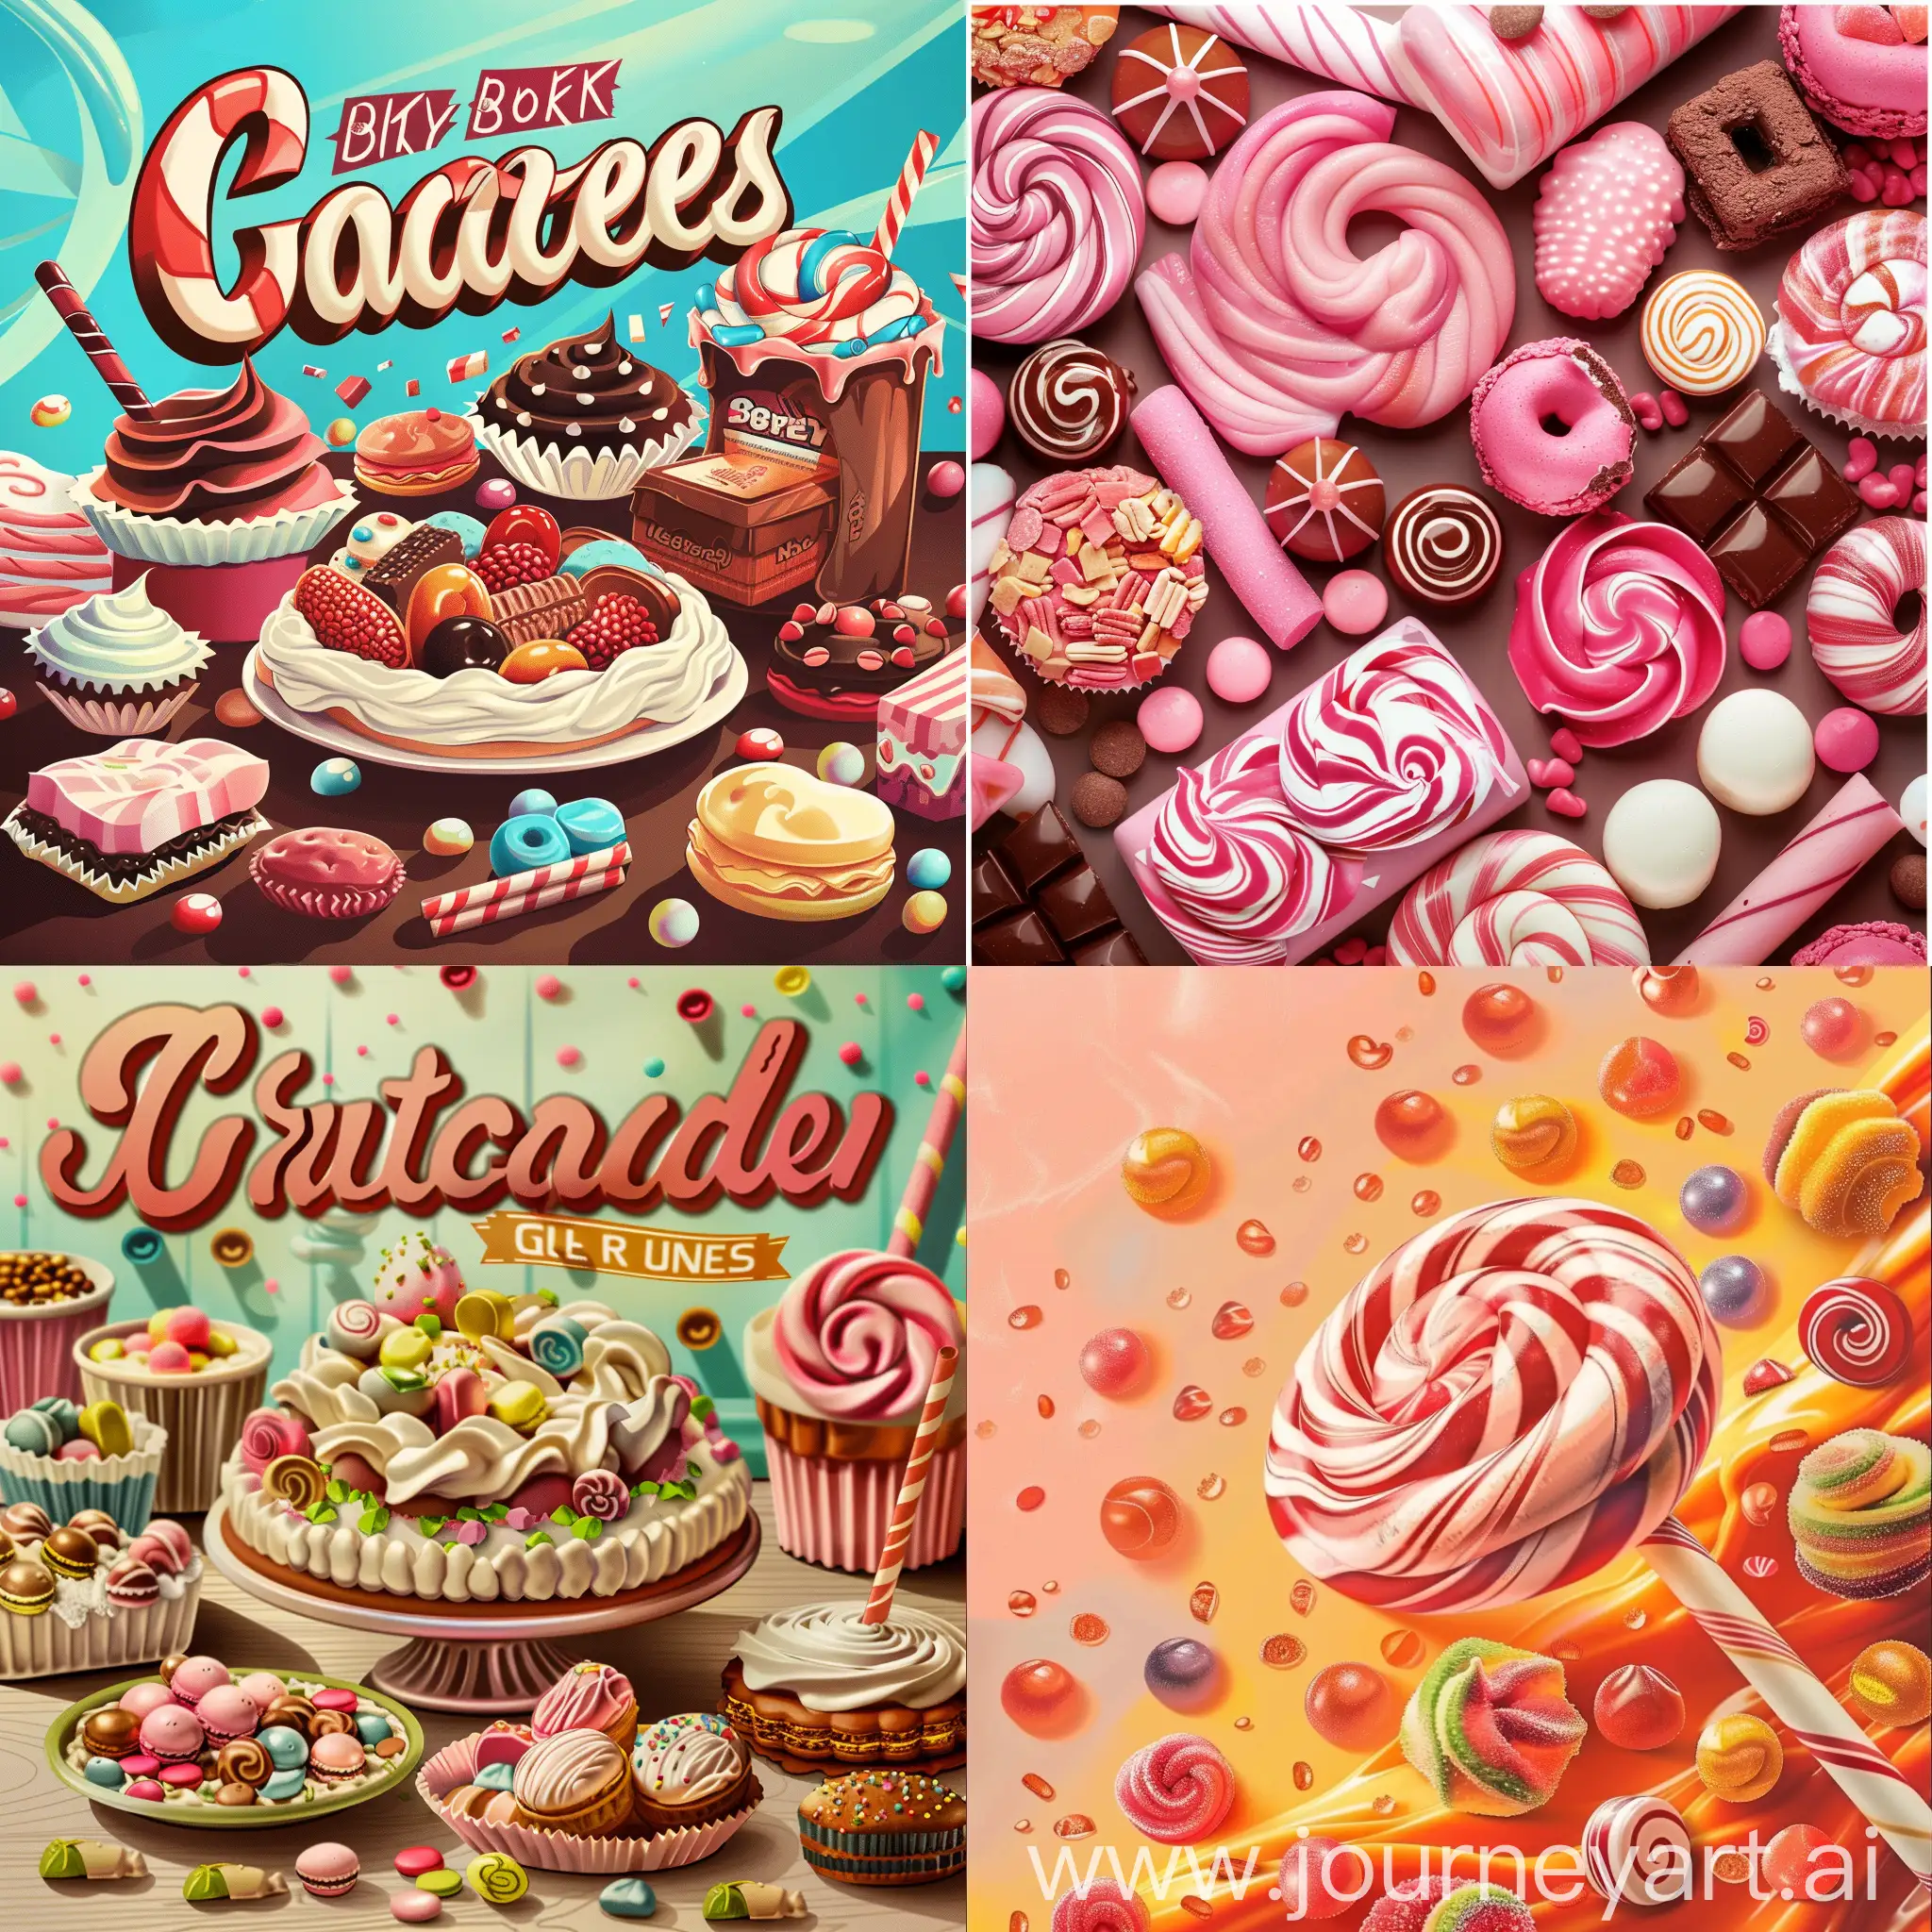 Vibrant-Confectionery-Advertisement-Poster-with-Tempting-Treats